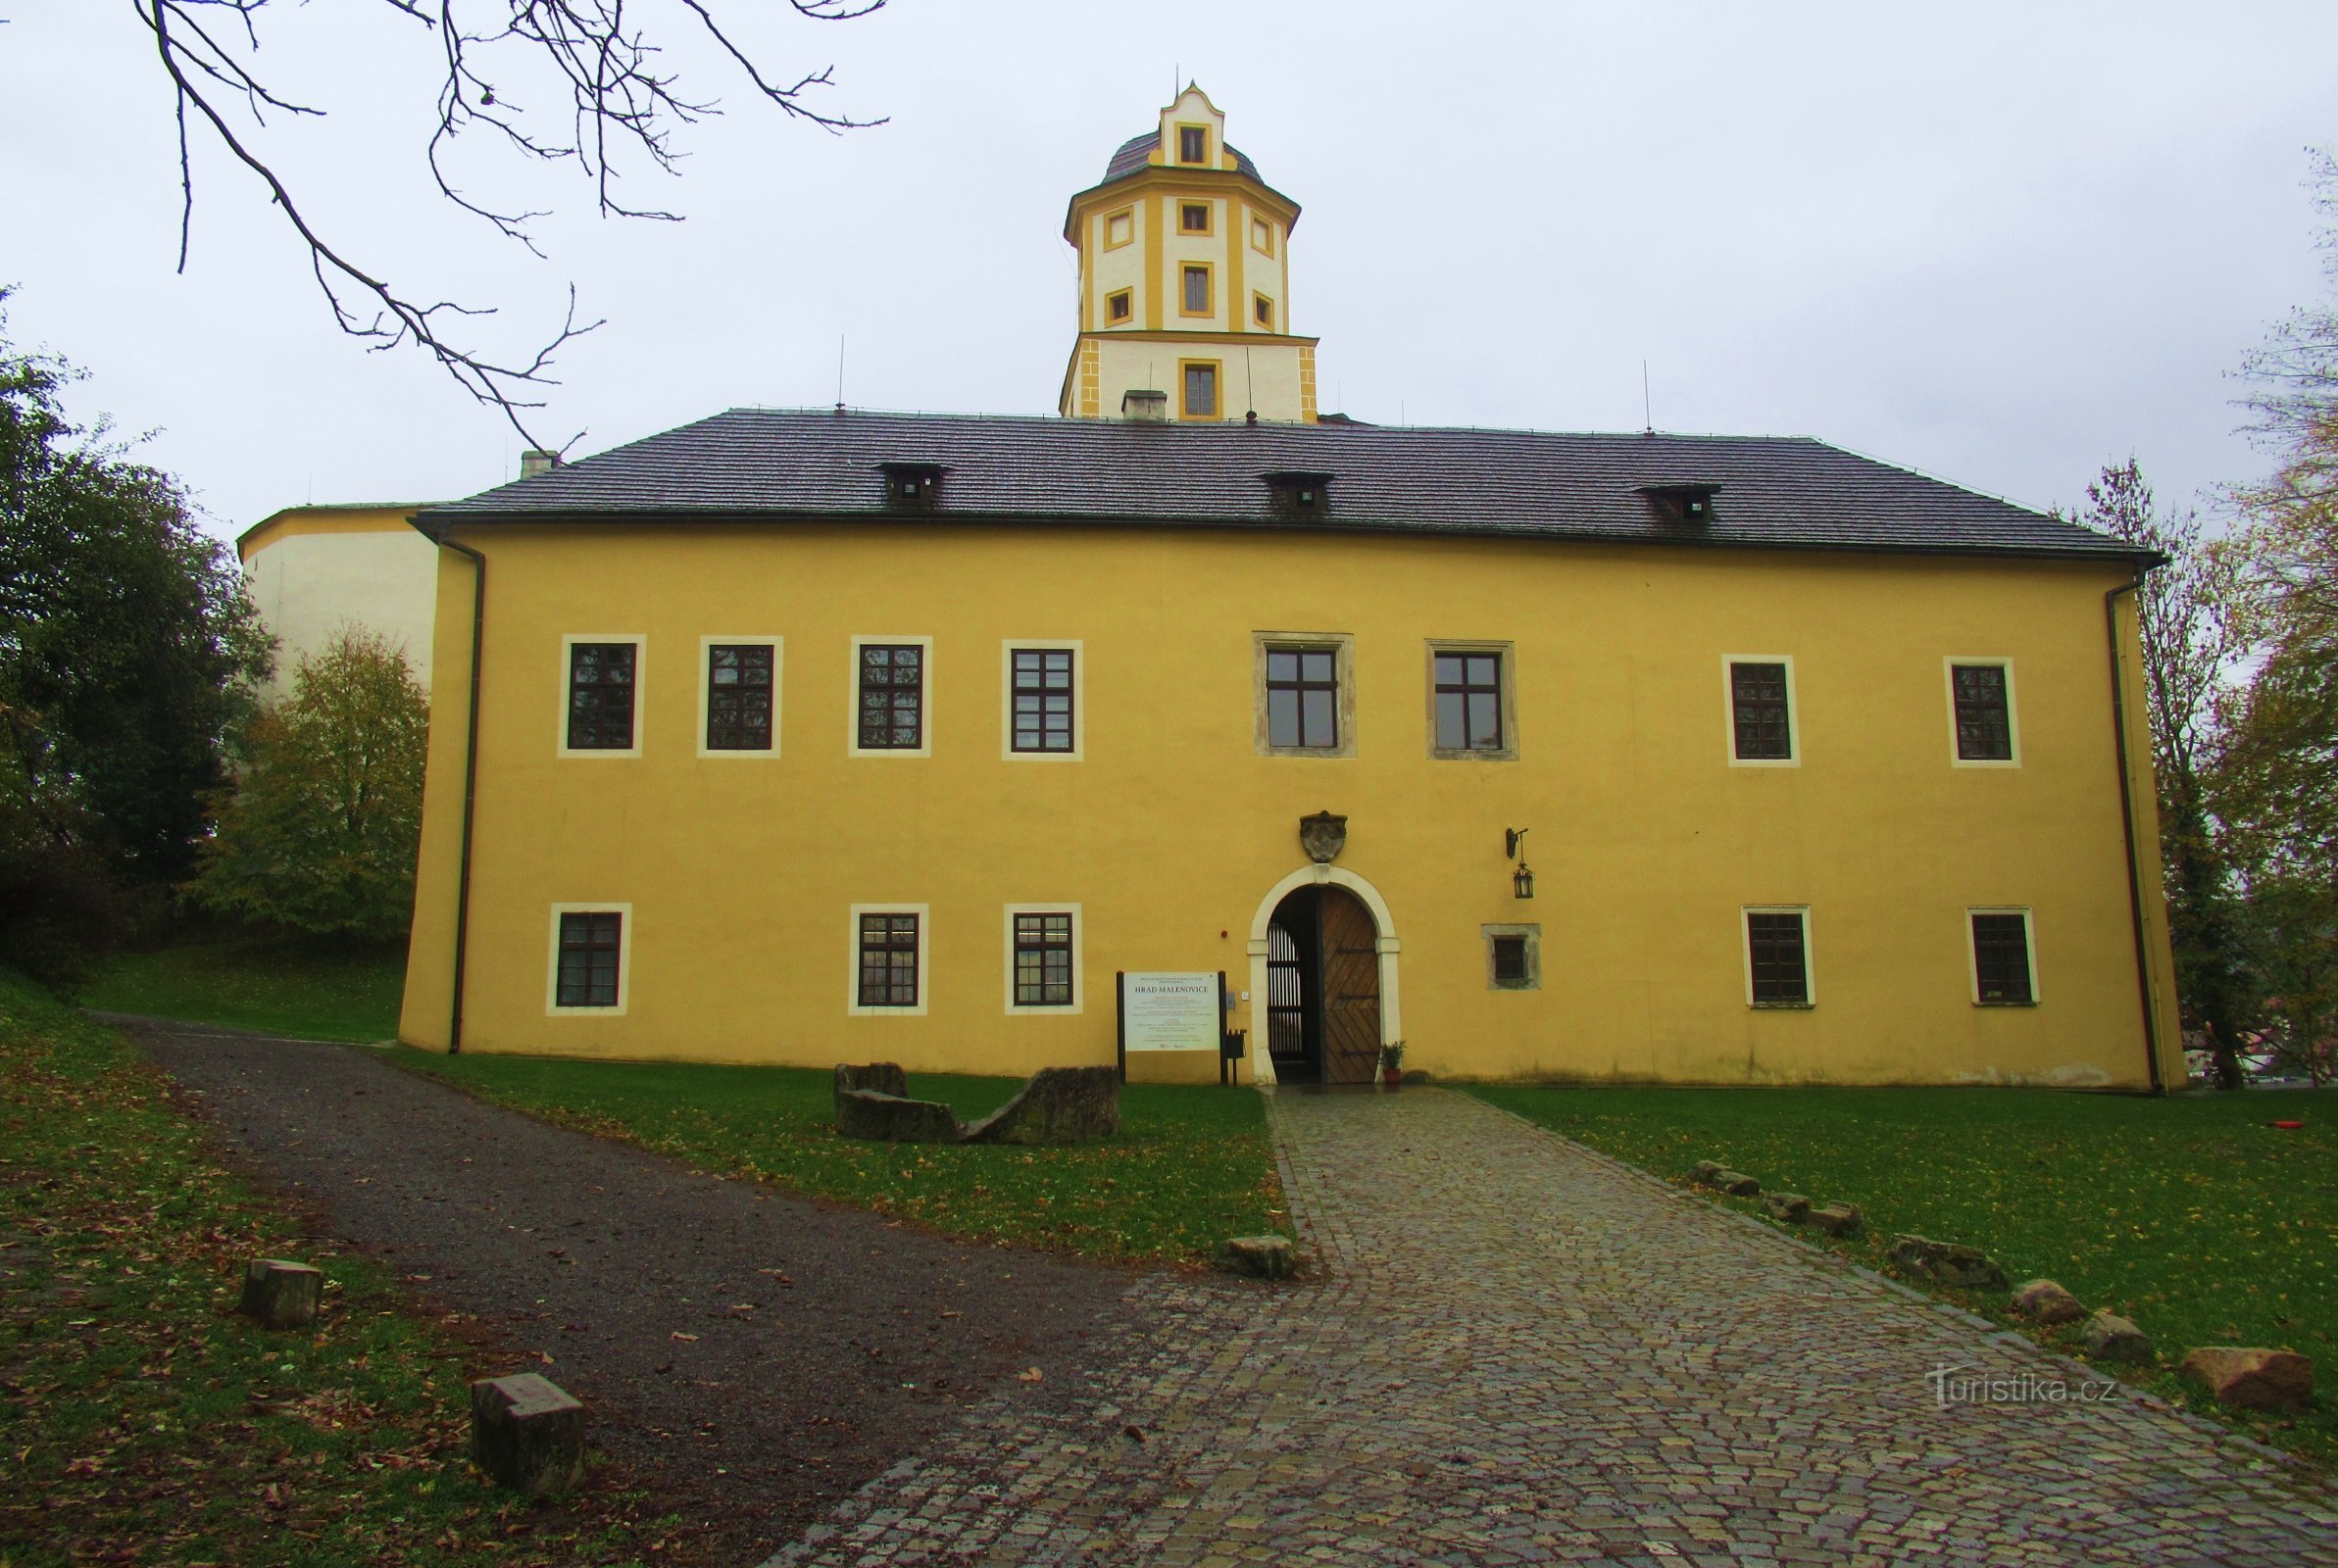 Behind the new exhibits to the castle in Malenovice